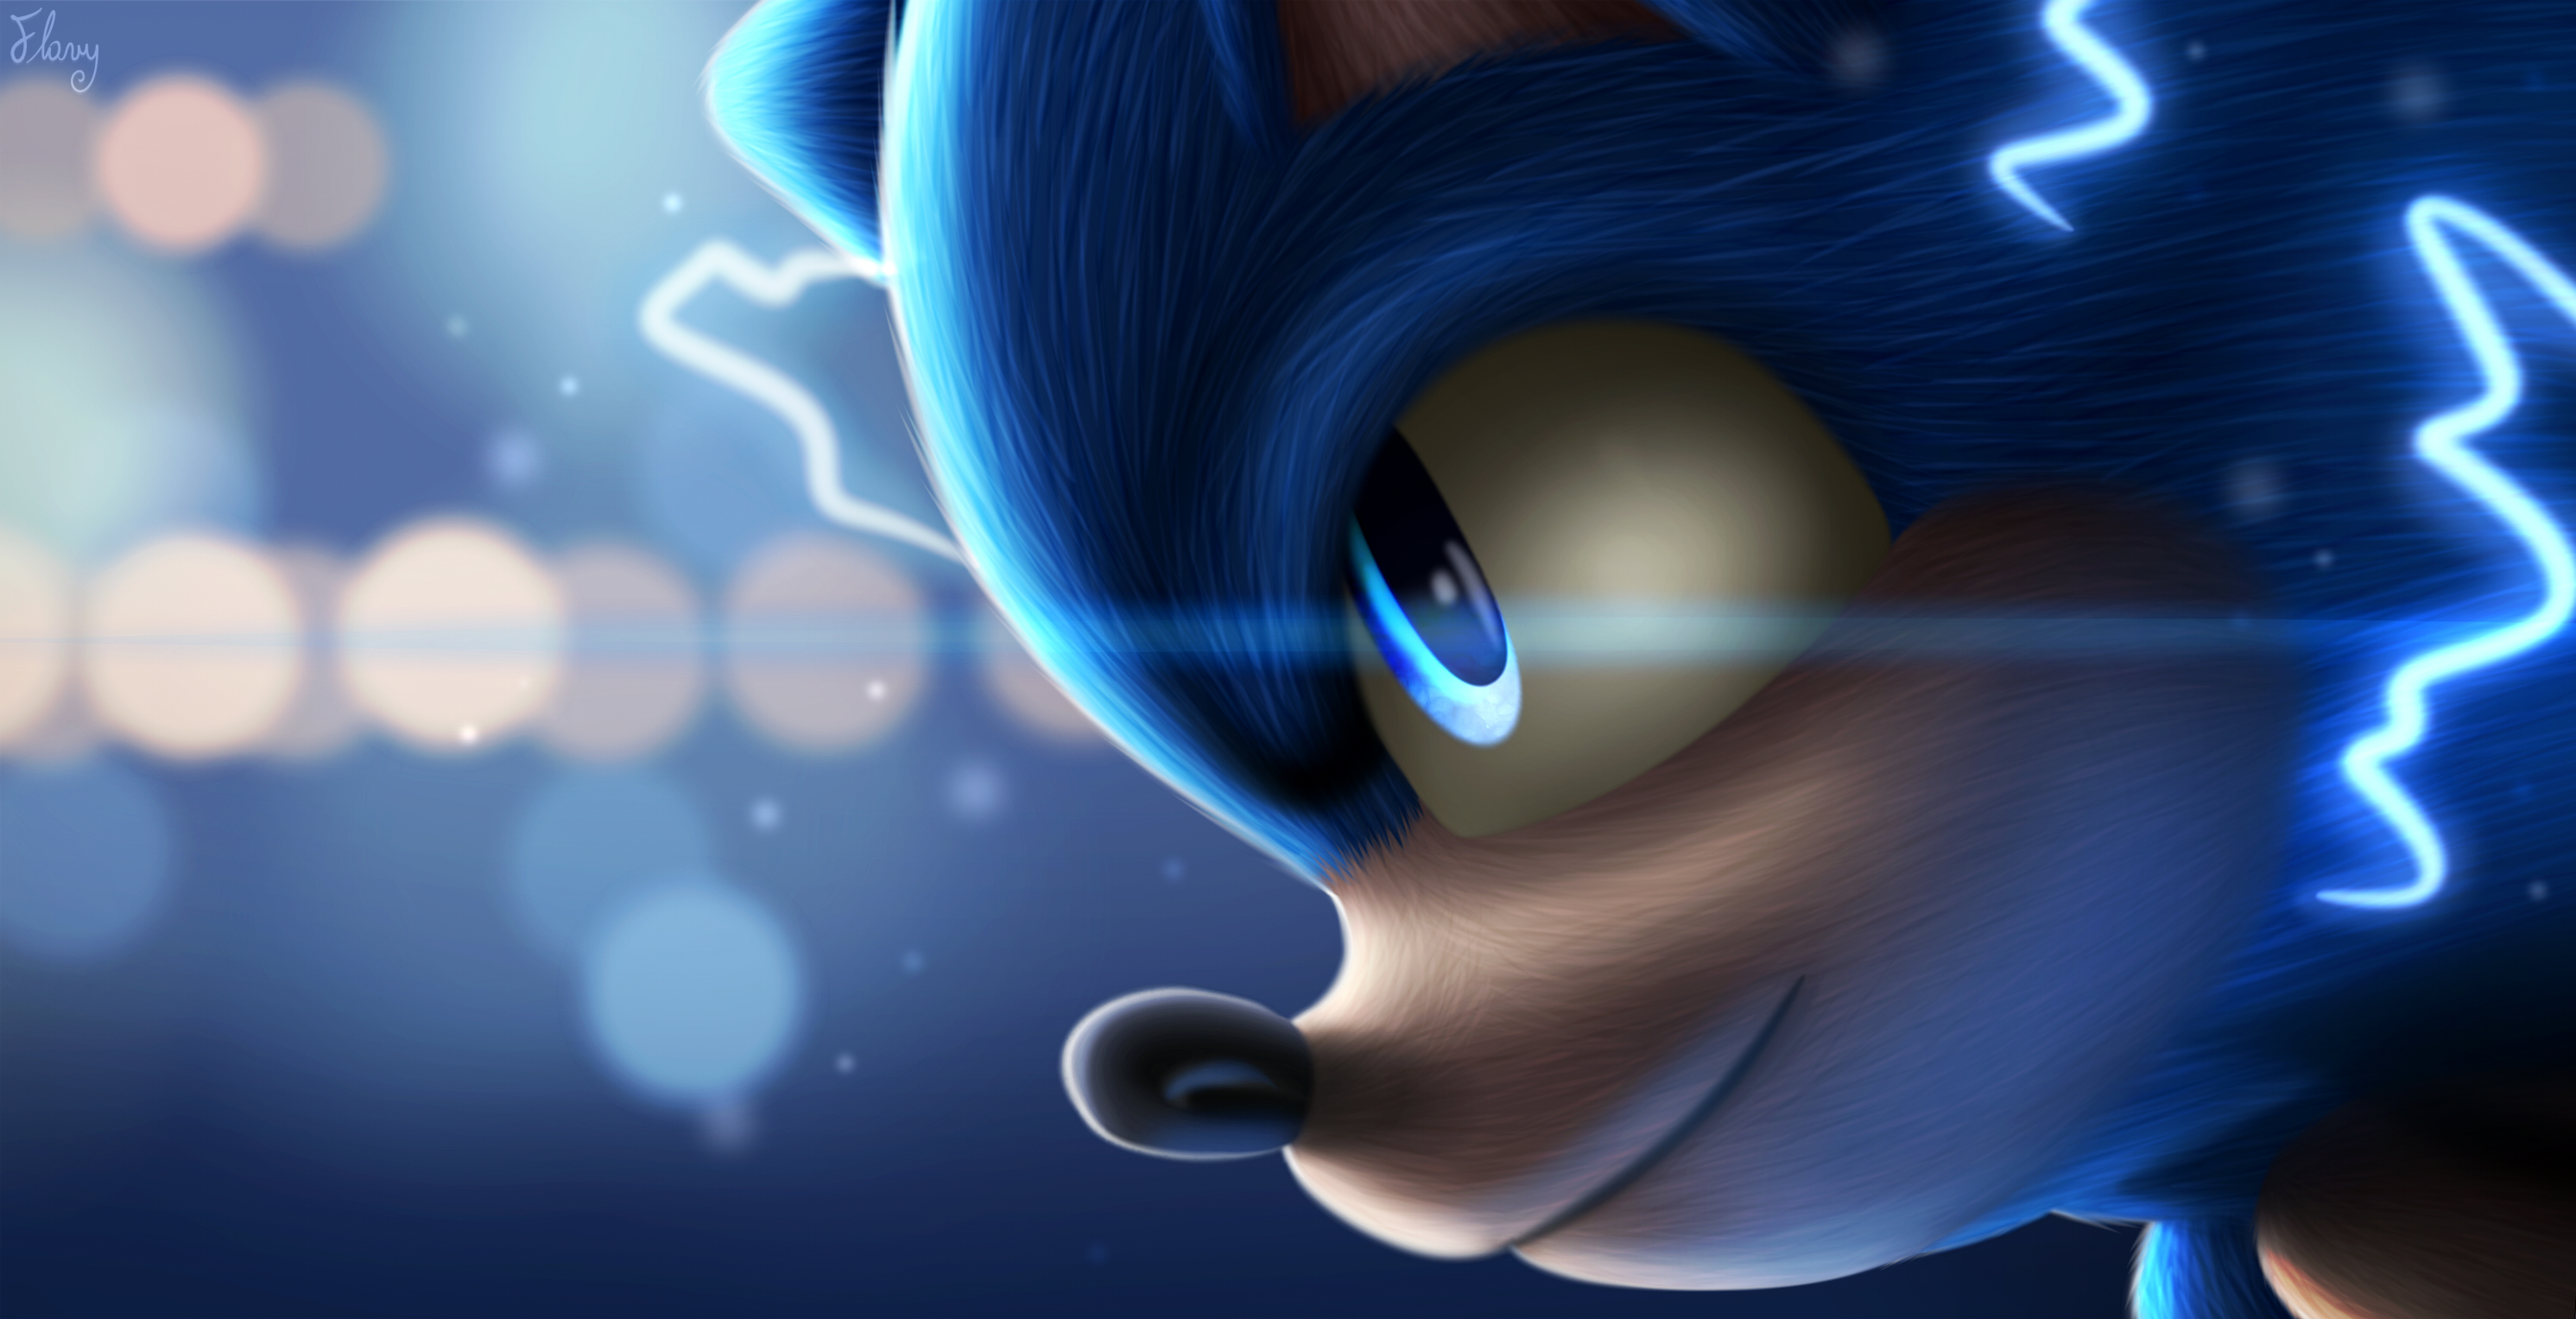 2560x1440 Sonic The Hedgehog Art 2560x1440 Resolution Wallpaper Hd Movies 4k Wallpapers Images Photos And Background Wallpapers Den